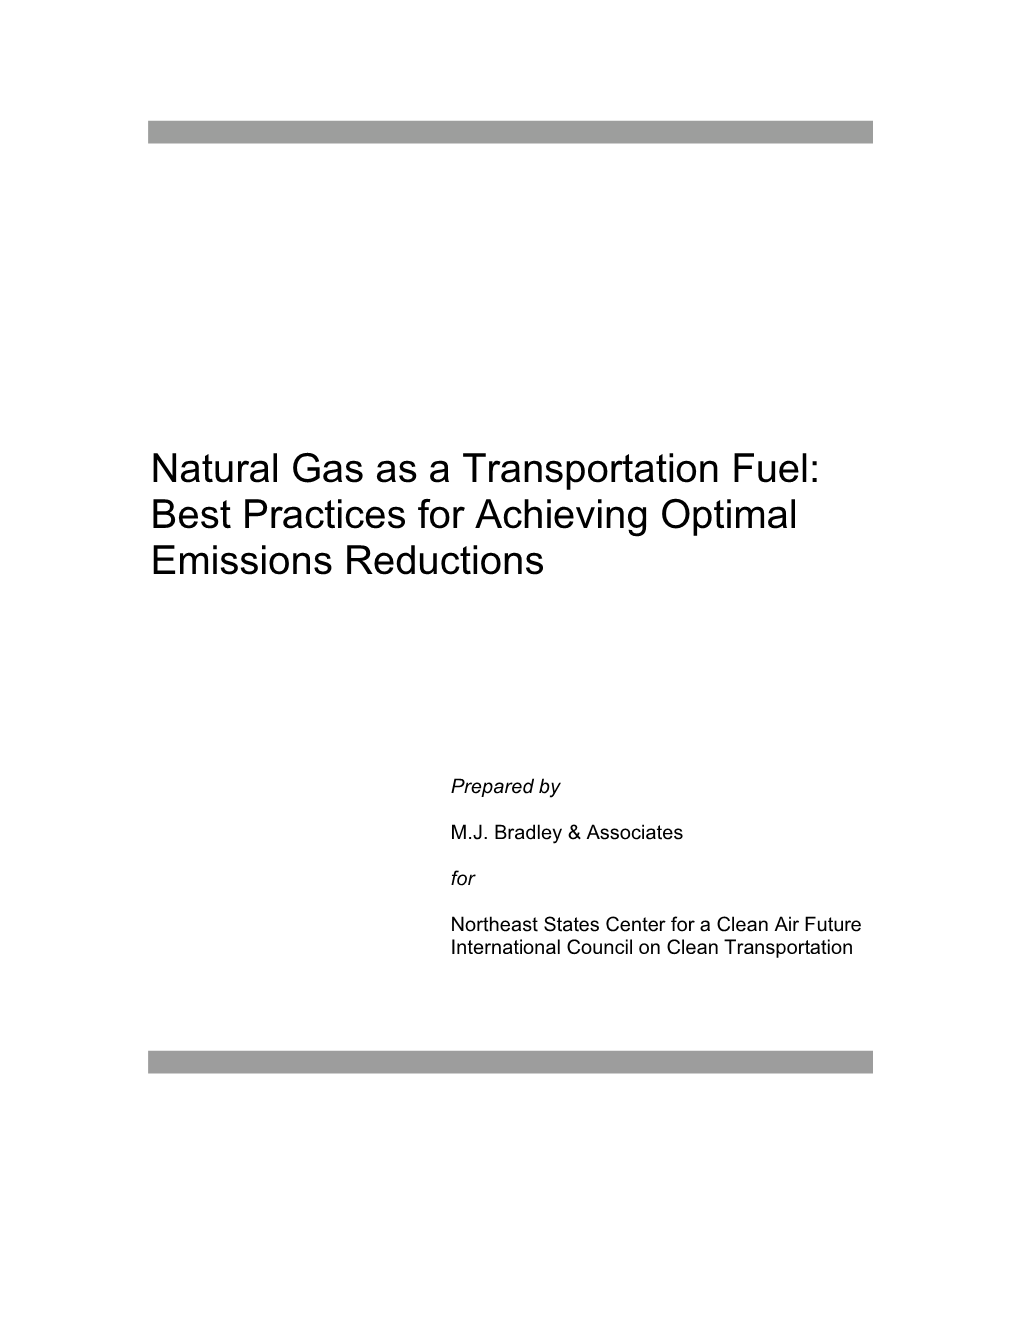 Natural Gas As a Transportation Fuel: Best Practices for Achieving Optimal Emissions Reductions